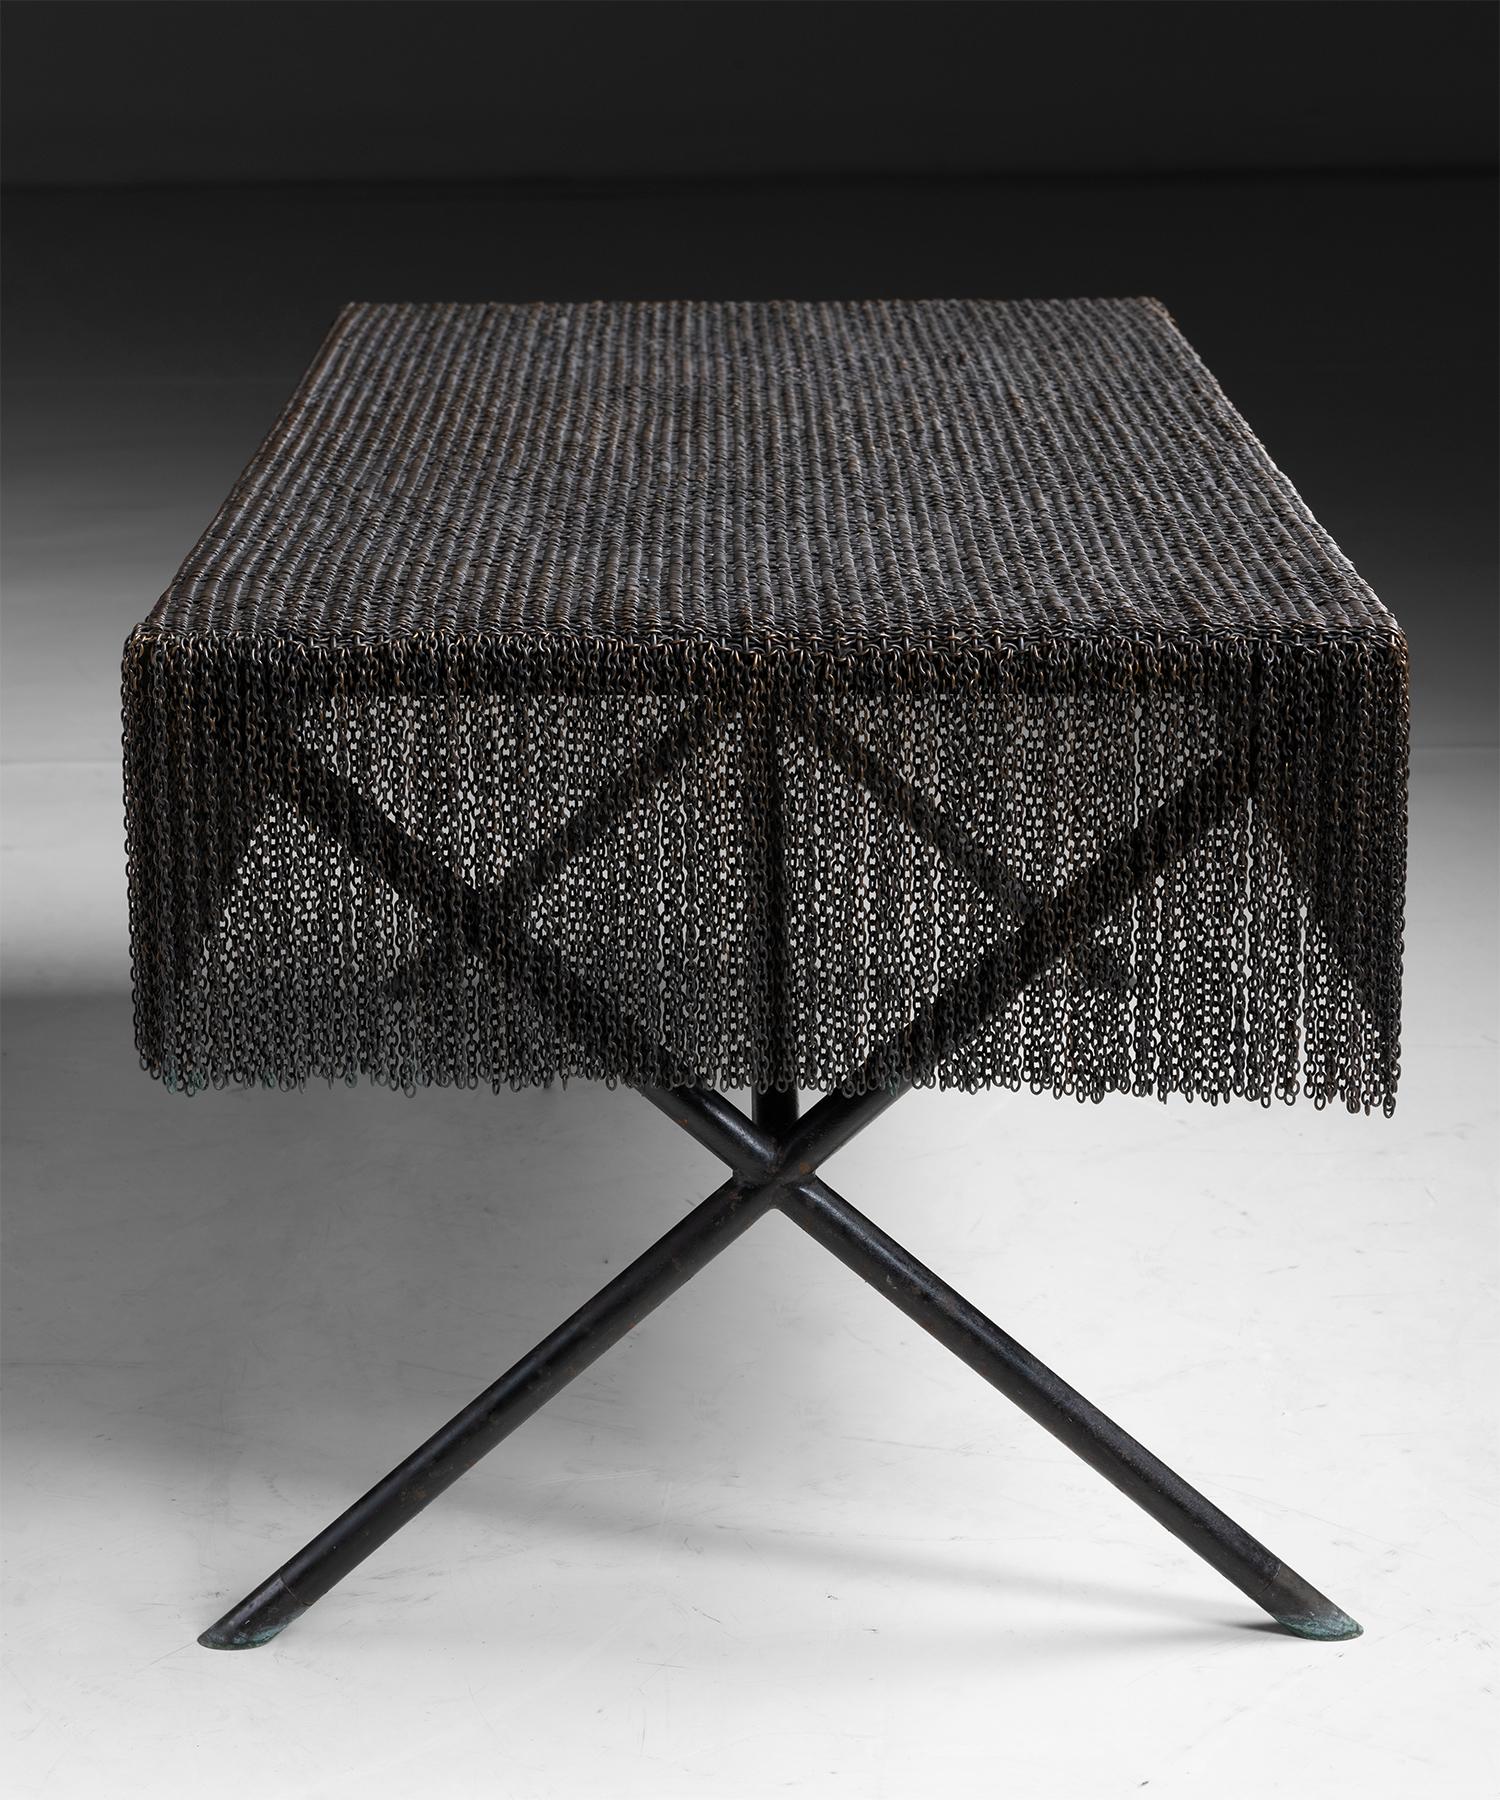 Contemporary Chain Mail Coffee Table by Solange Azagury Partridge, Made in England